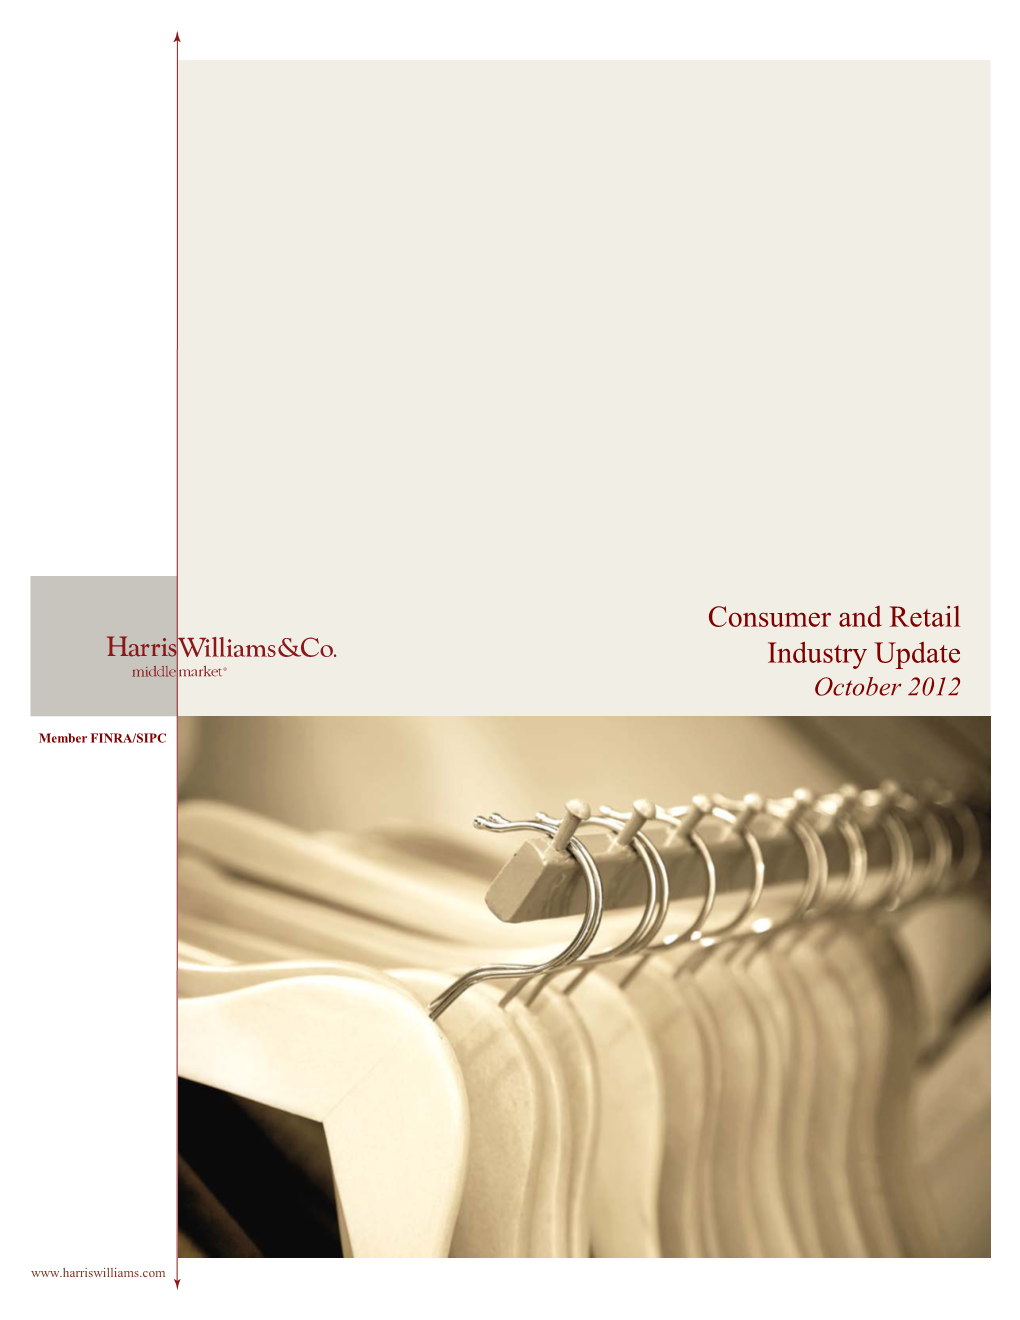 Consumer and Retail Industry Update October 2012